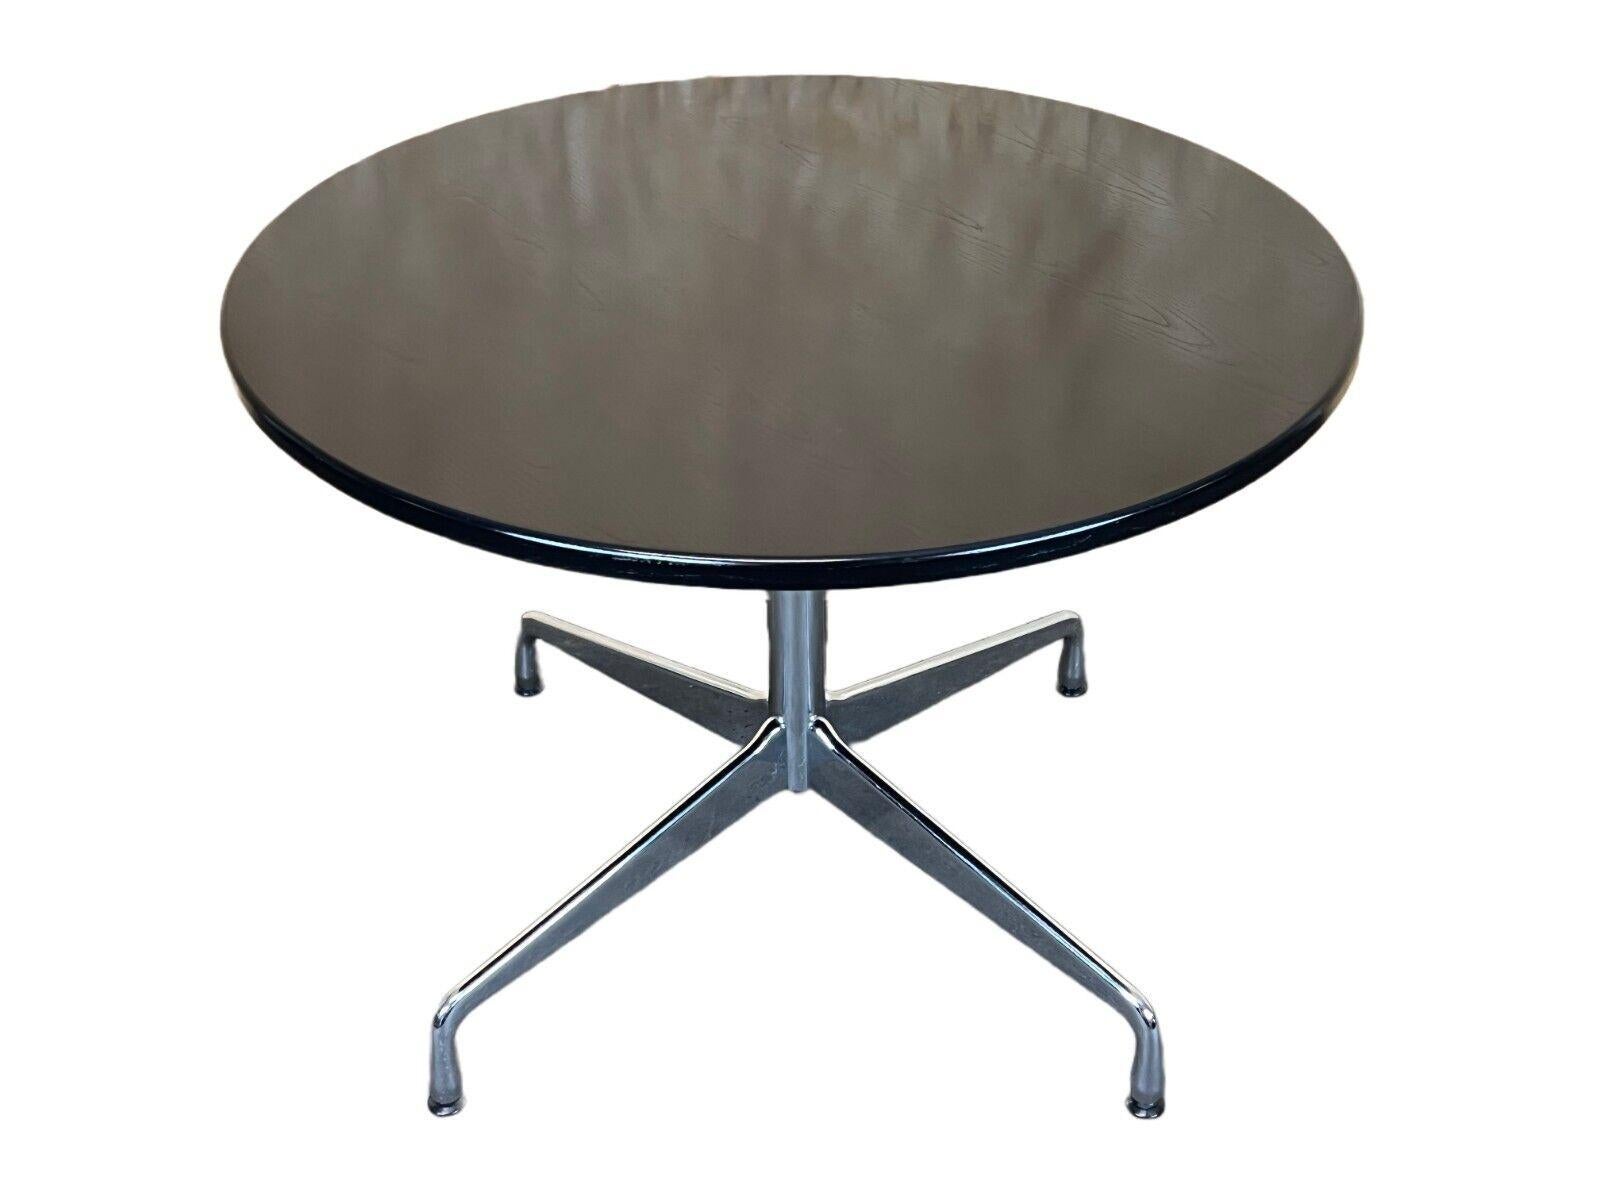 Segmented table by Charles & Ray Eames for Vitra Black Chrome.

Object: Segmented table

Manufacturer: Vitra

Condition: good

Age: around 1990

Dimensions:

Diameter = 100cm
Height = 73cm

Other notes:

The pictures serve as part